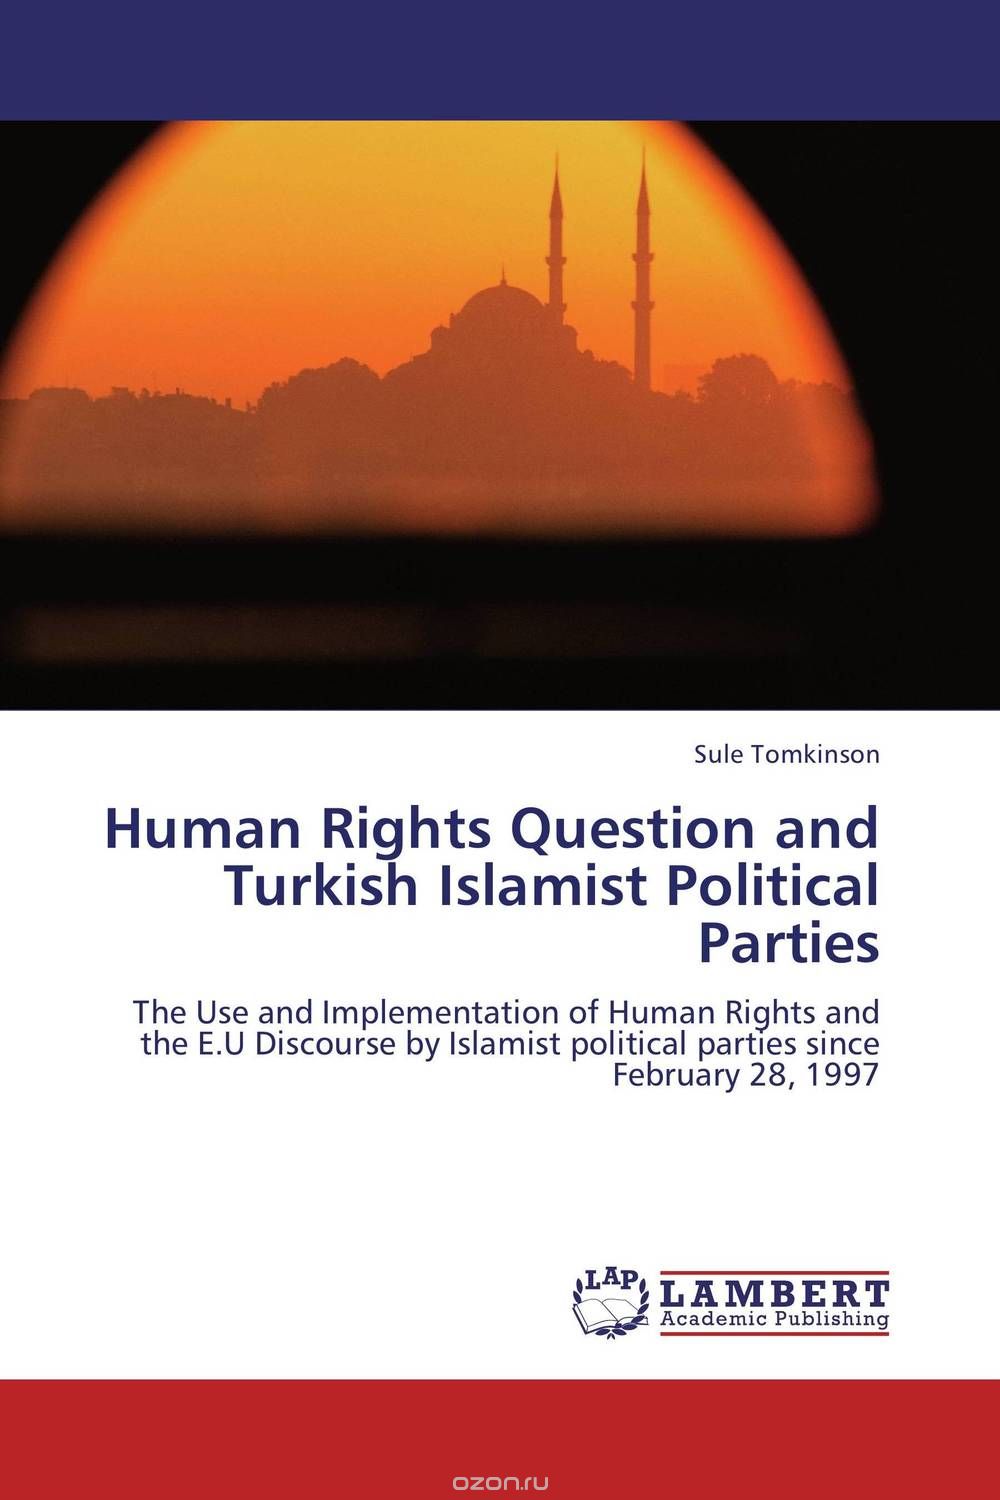 Human Rights Question and Turkish Islamist Political Parties